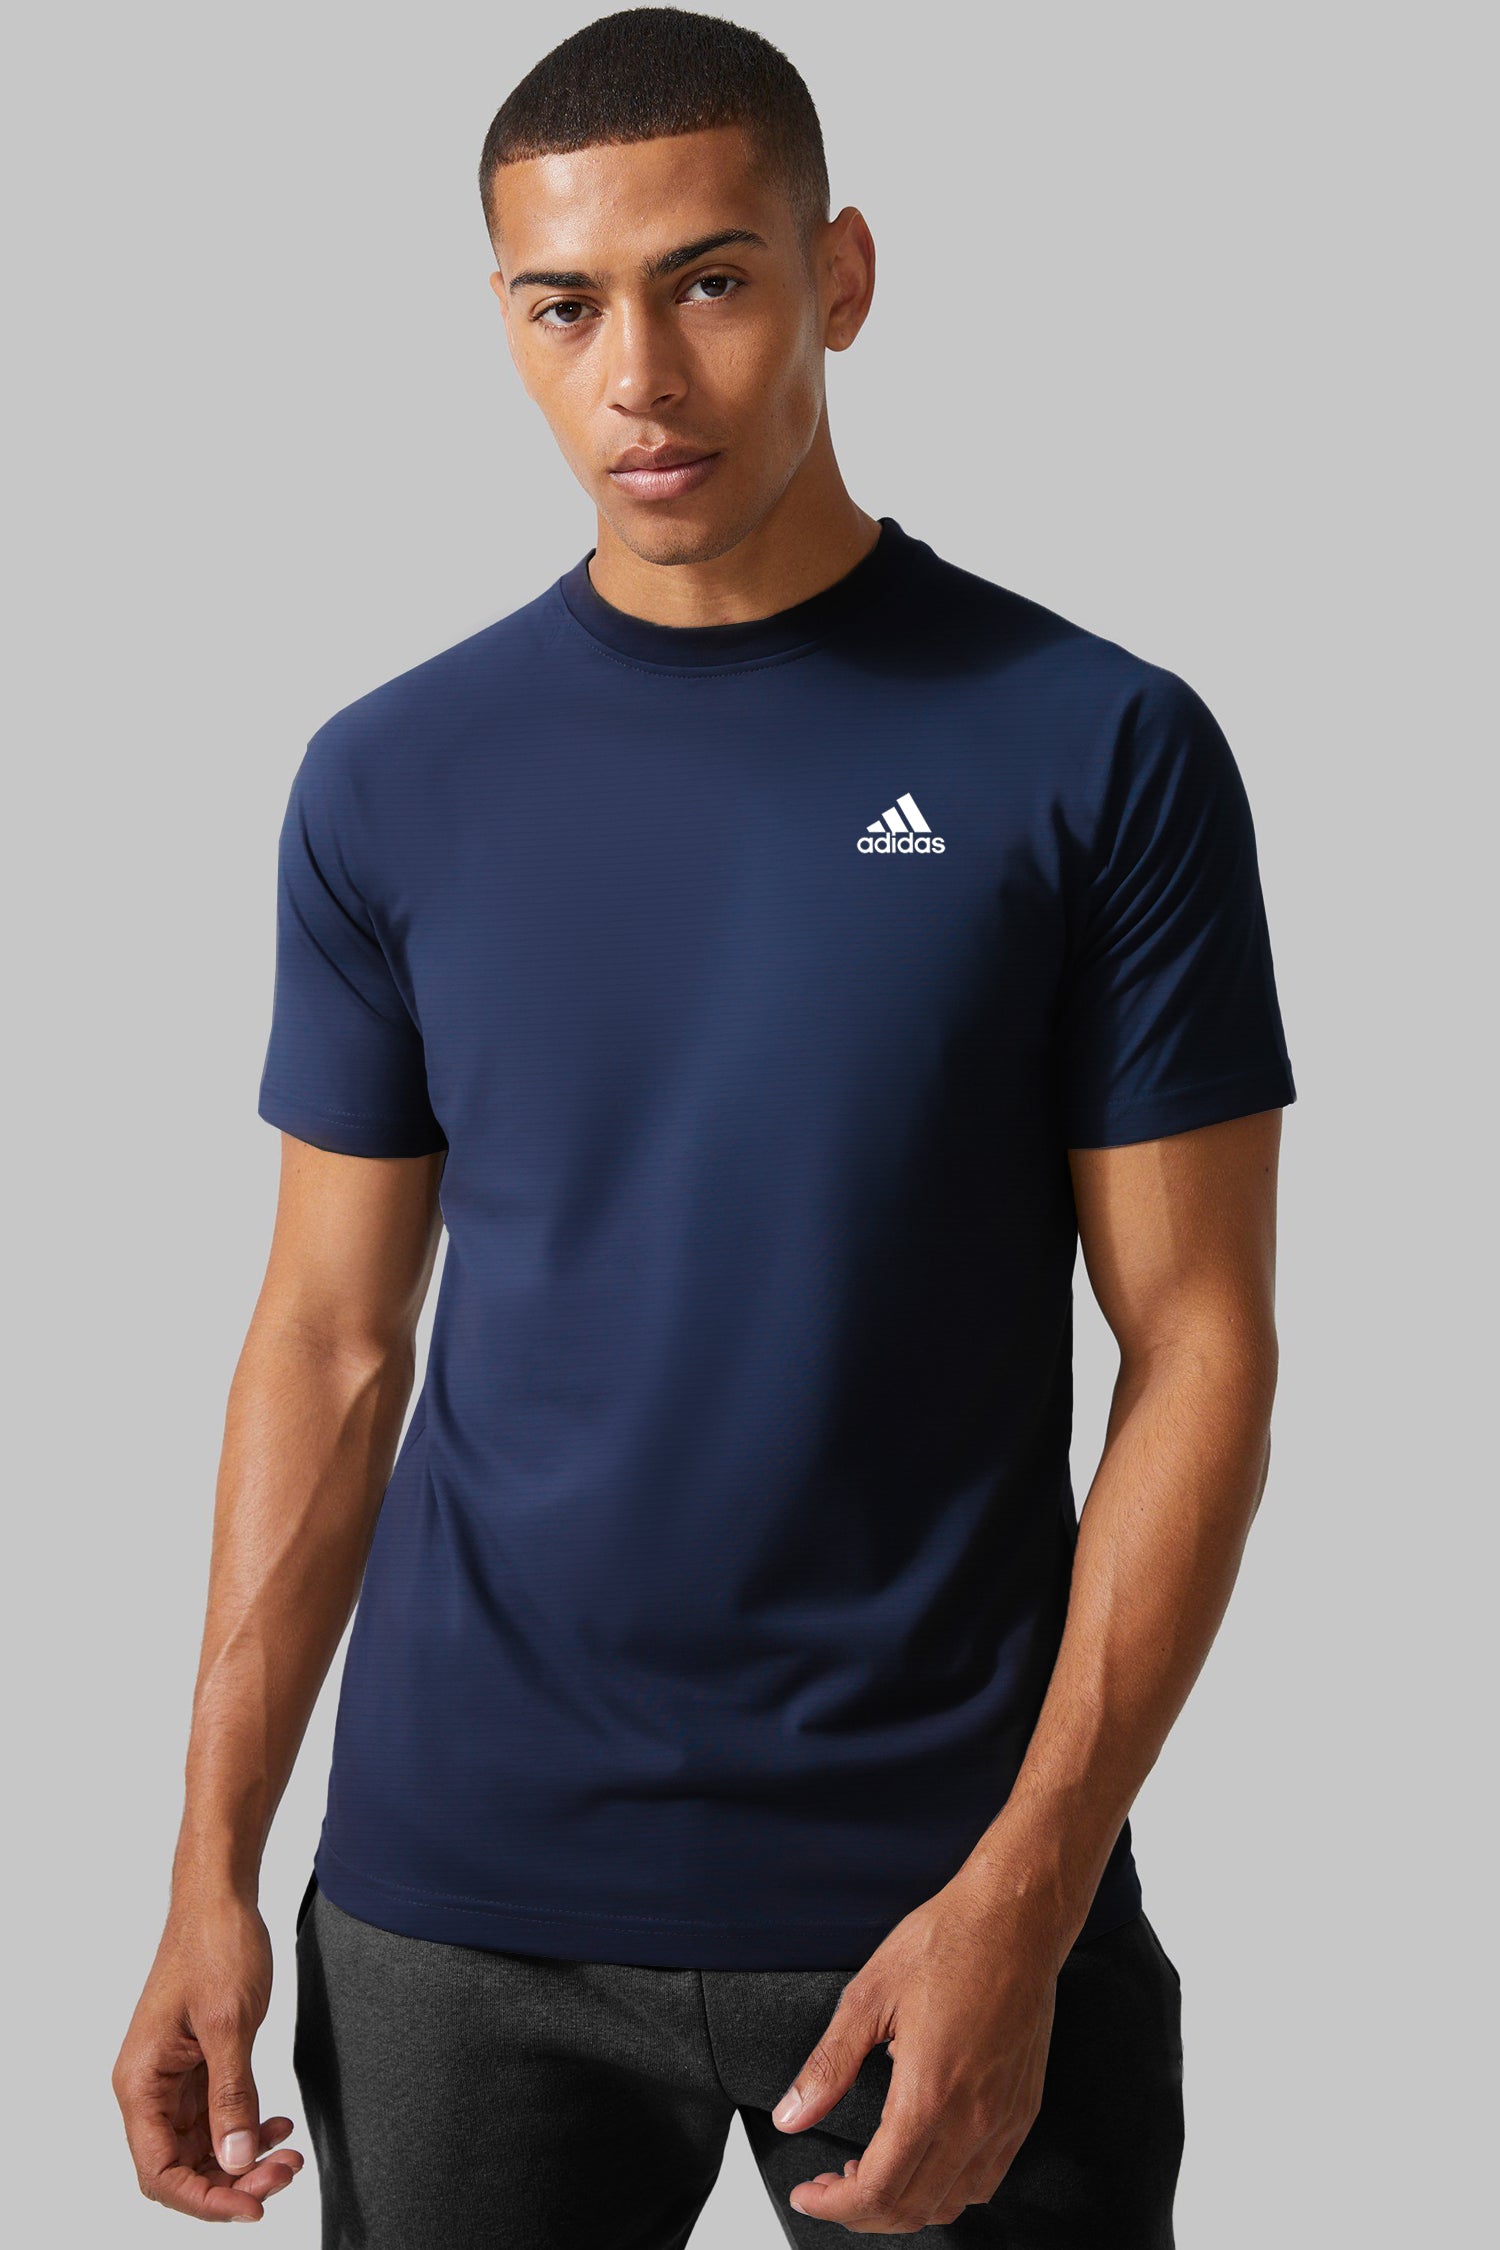 Adds Reflector Logo Branded Dry Fit Tee